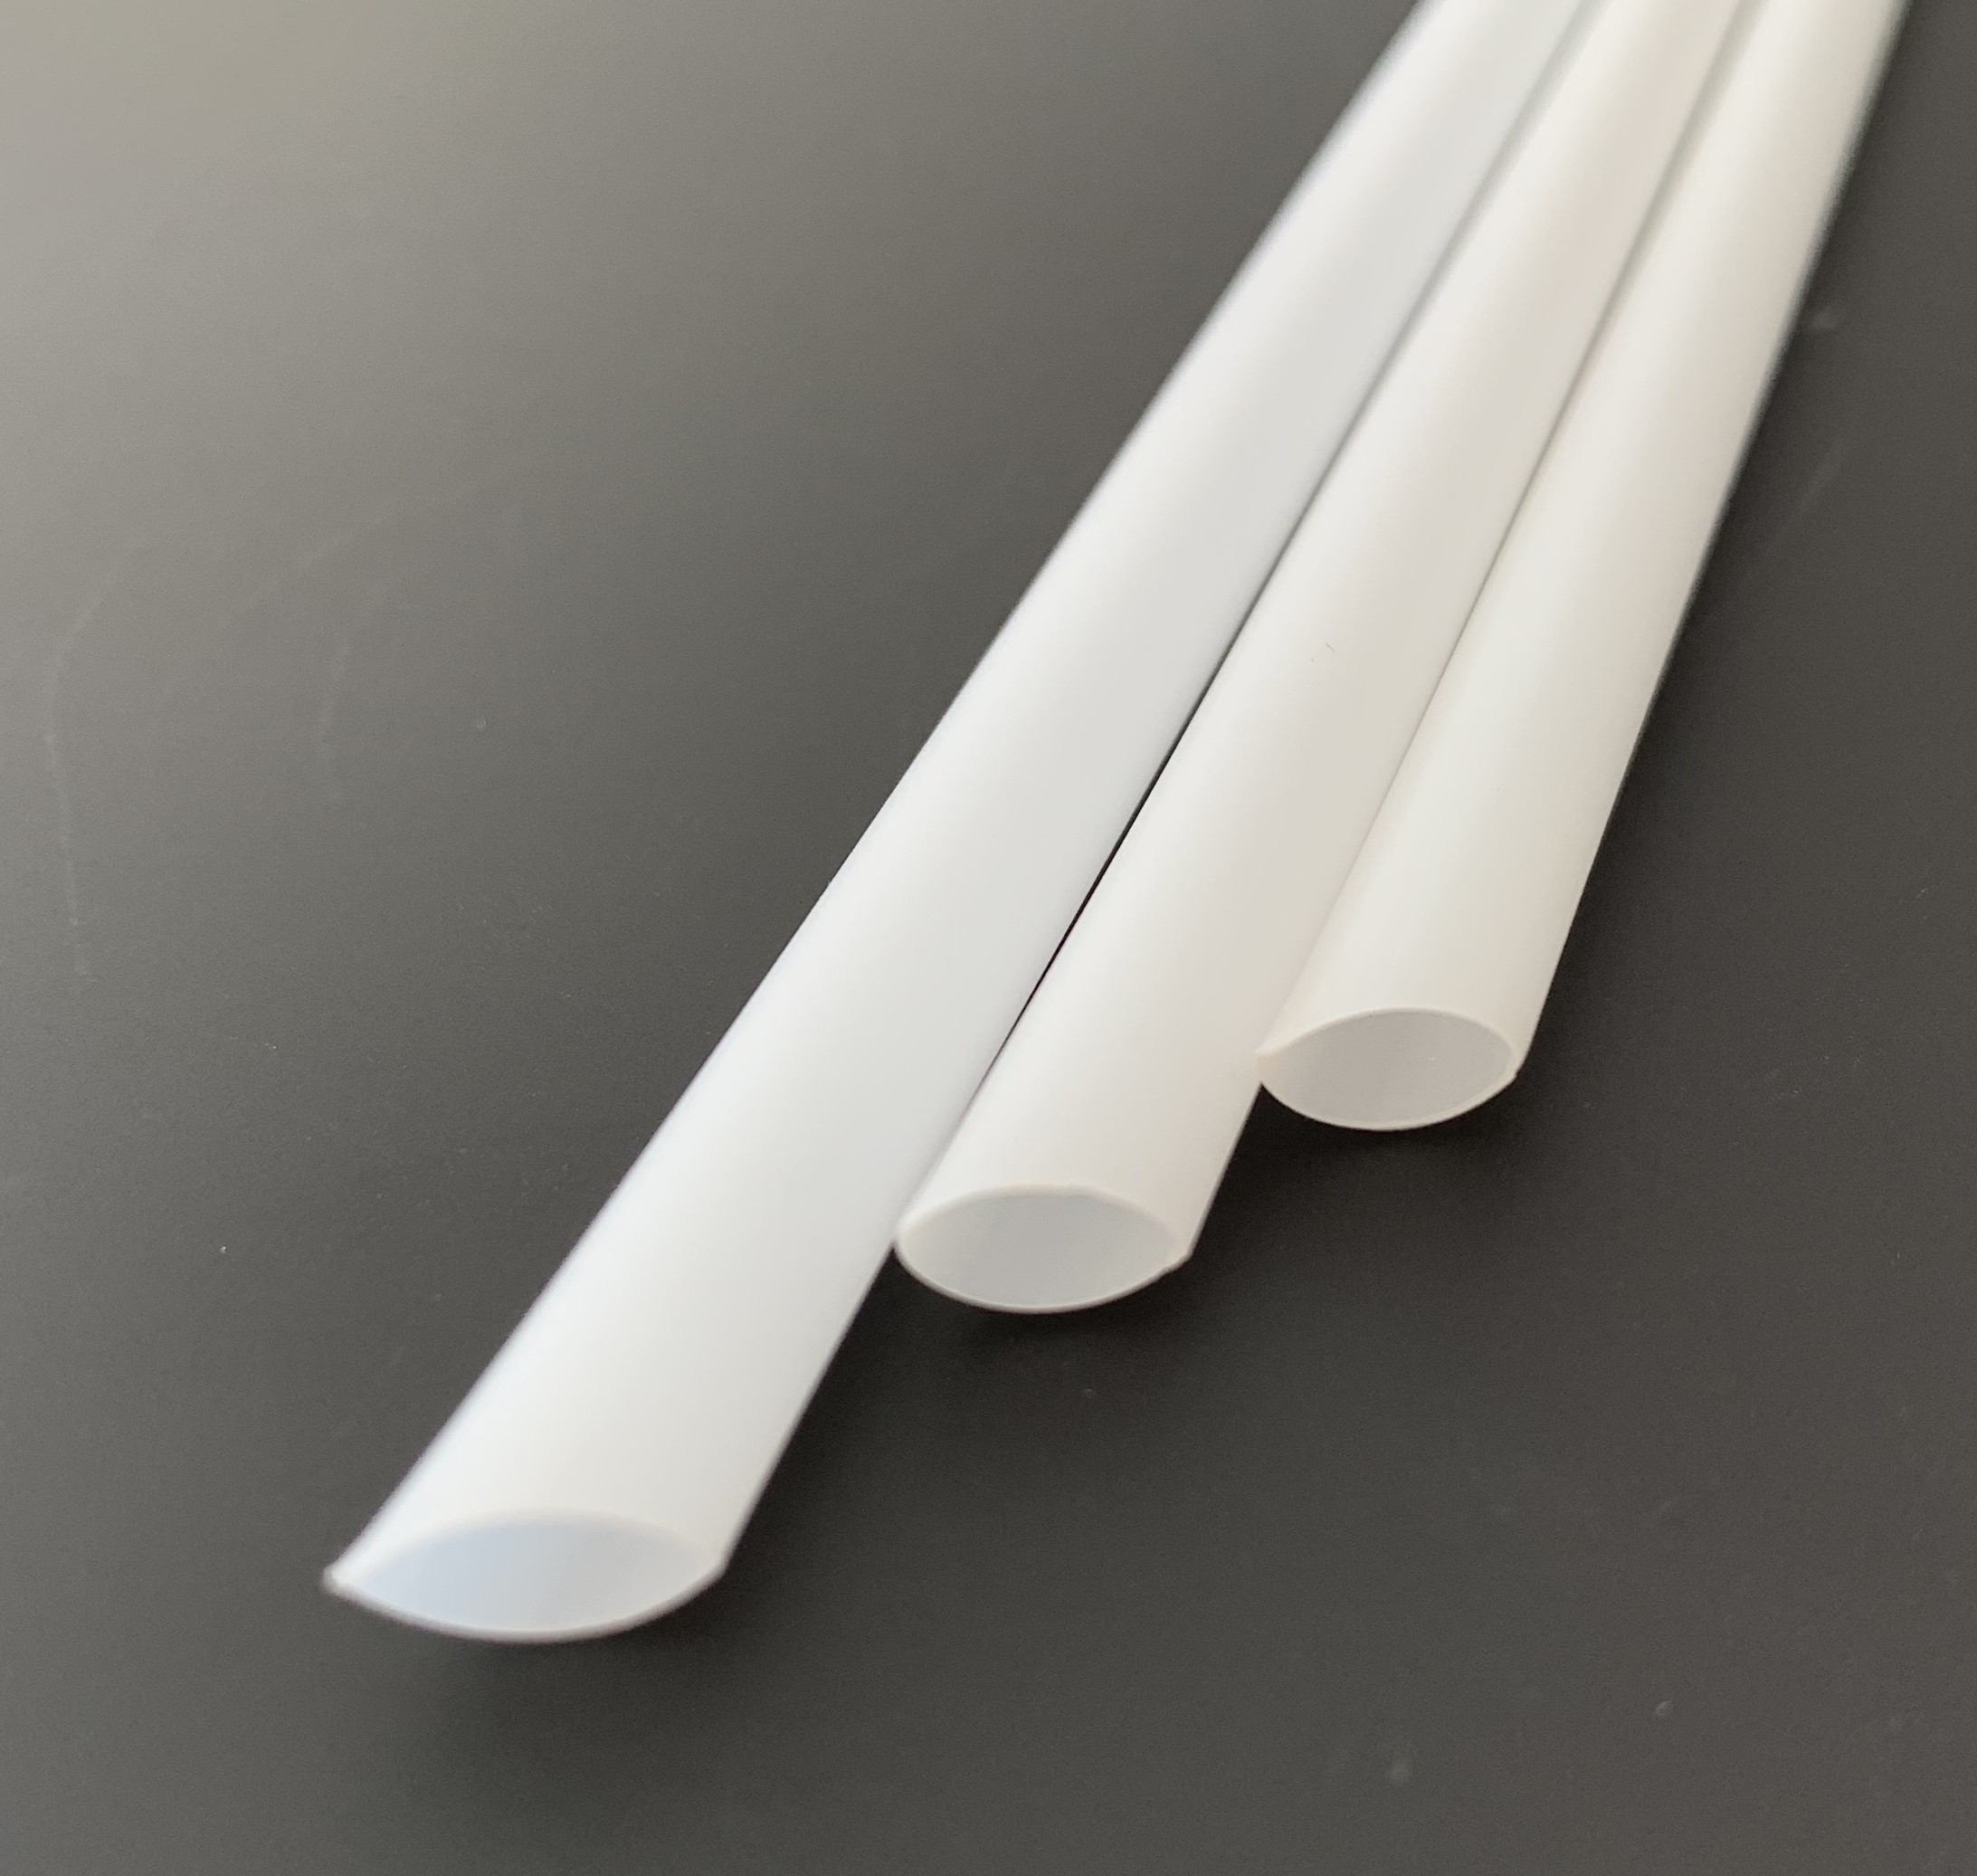 6mm-PLA Heat-Resistant Compostable Straw